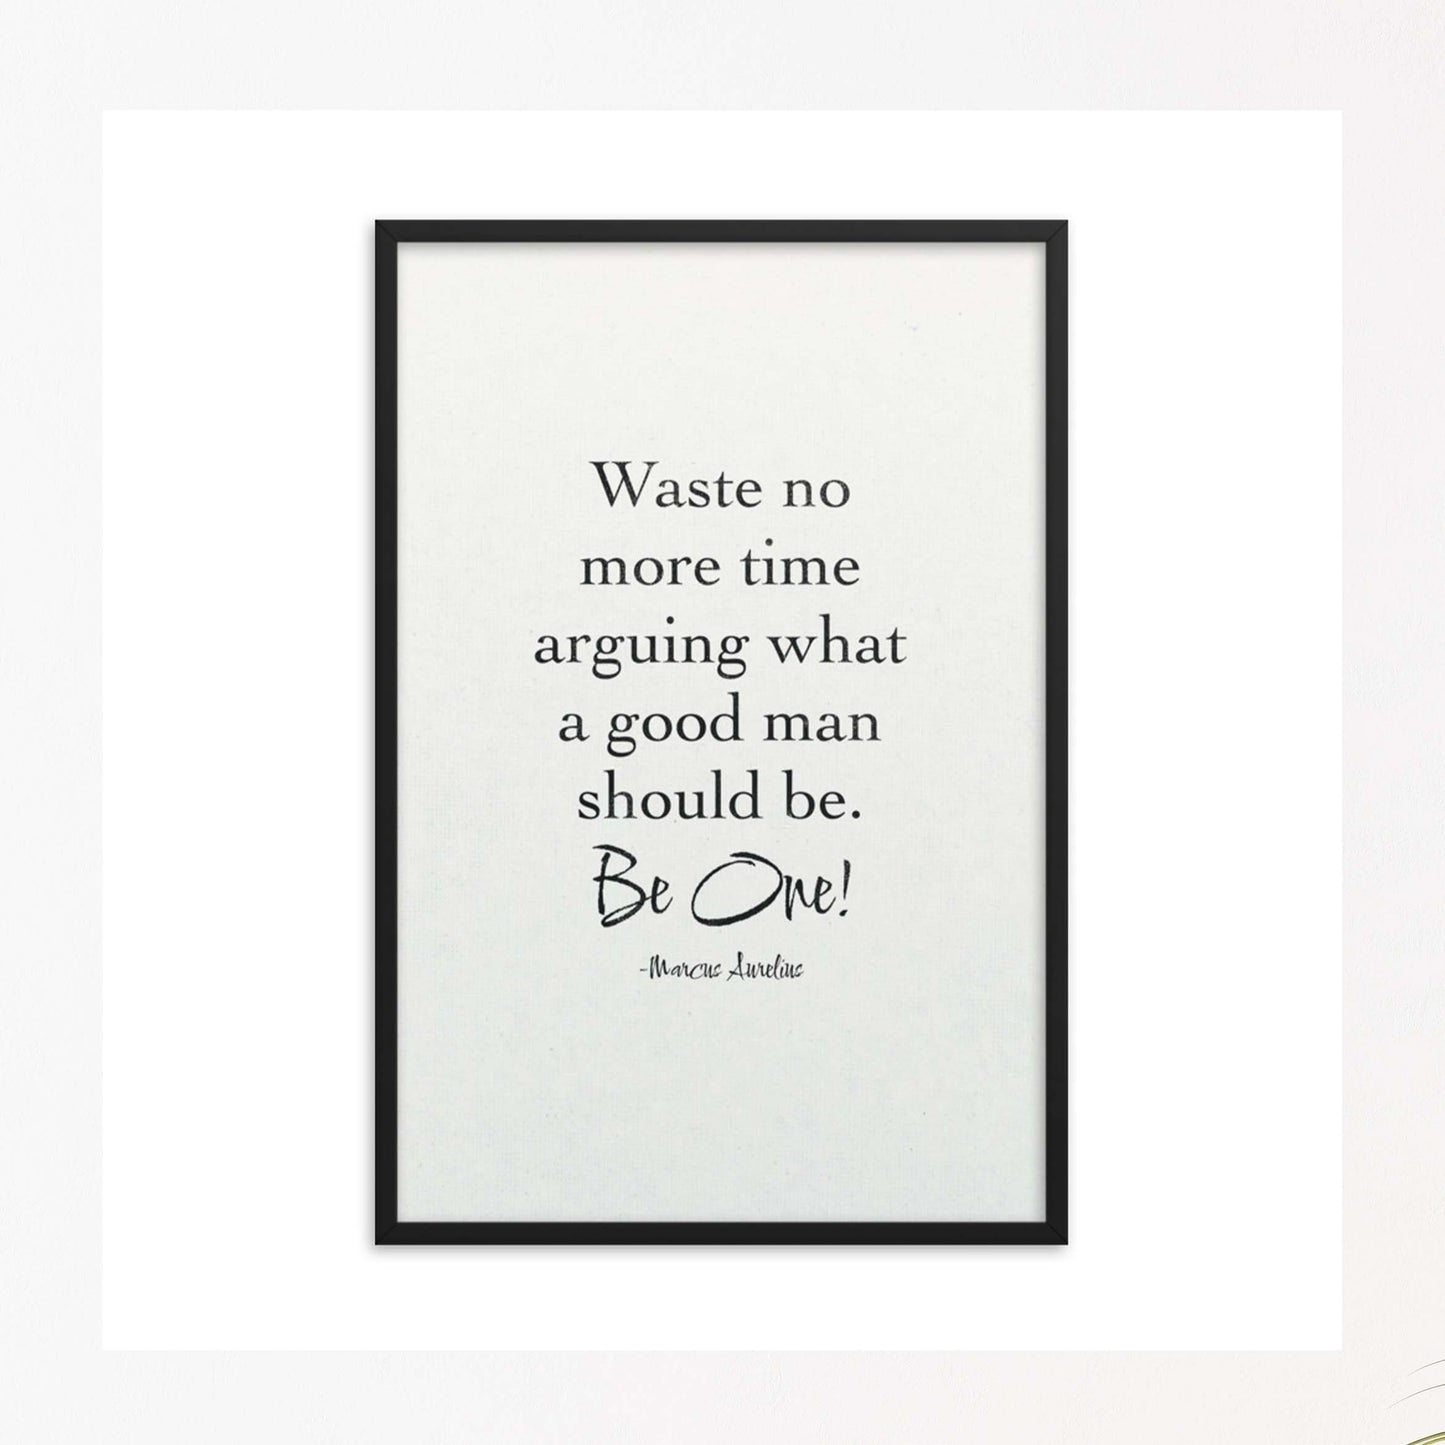 Waste no more time arguing what a good man should be. Be One! by marcus aurelius quote black on white poster in black frame.